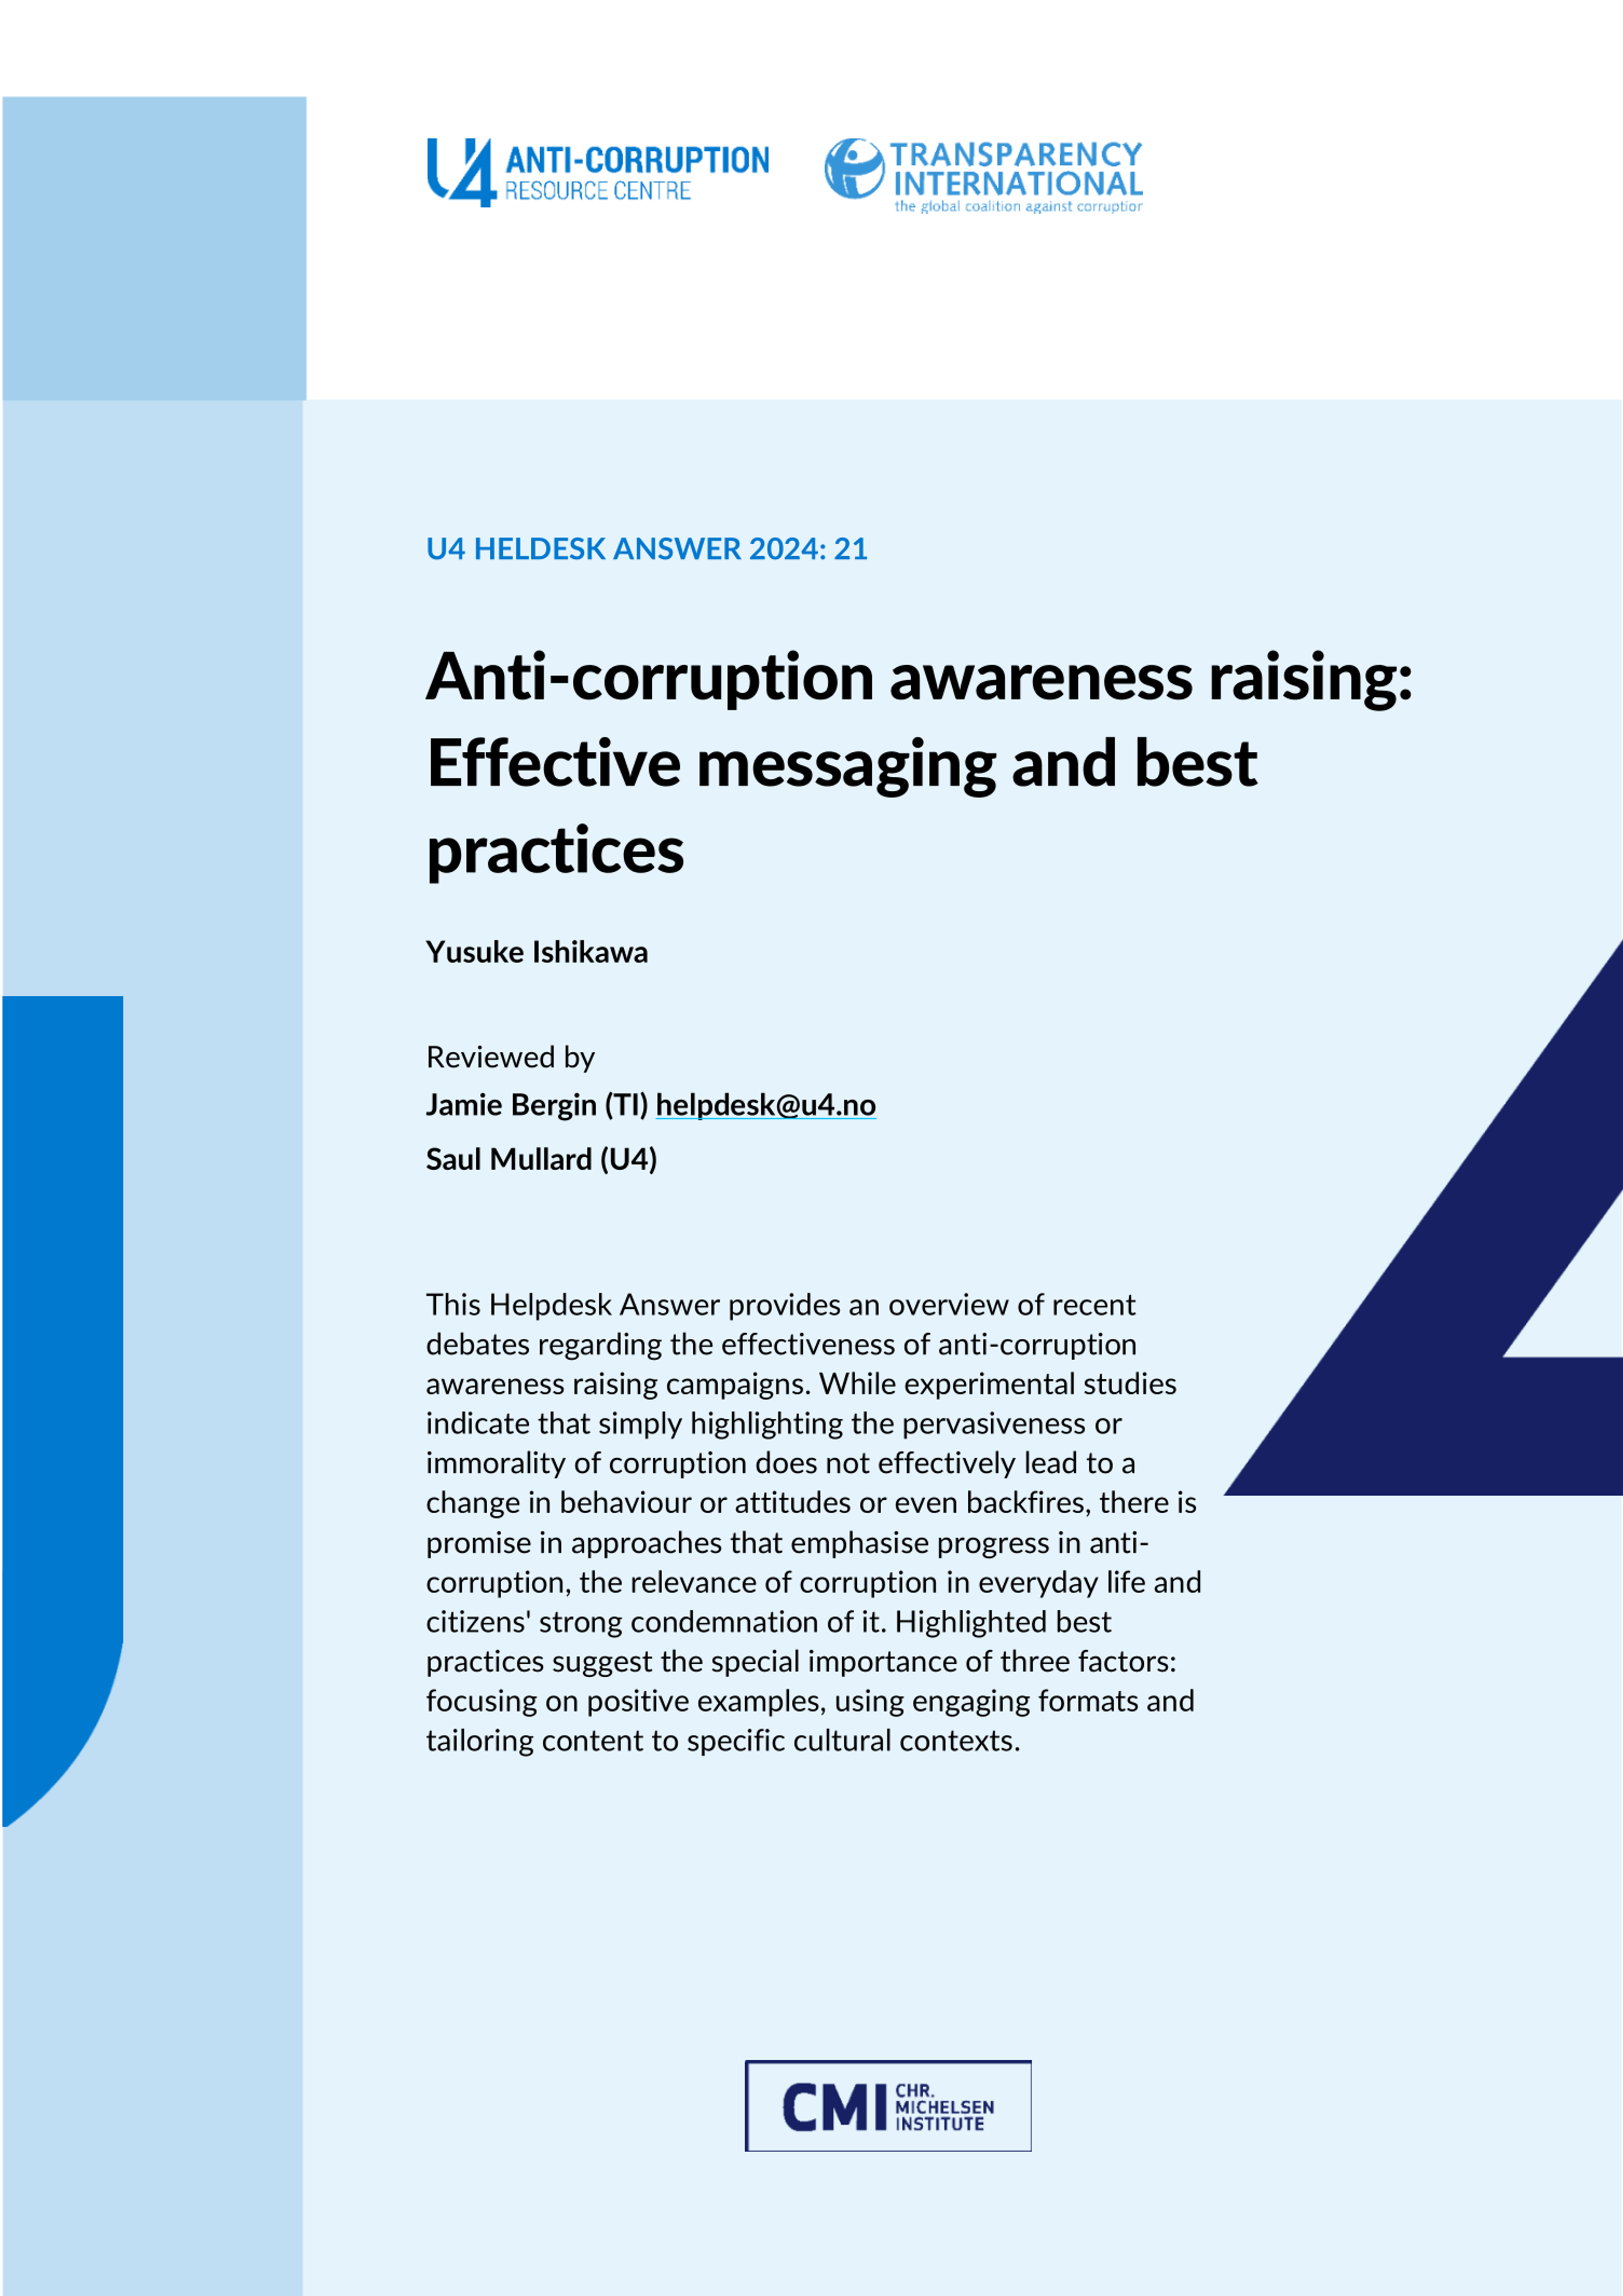 Anti-corruption awareness raising: Effective messaging and best practices